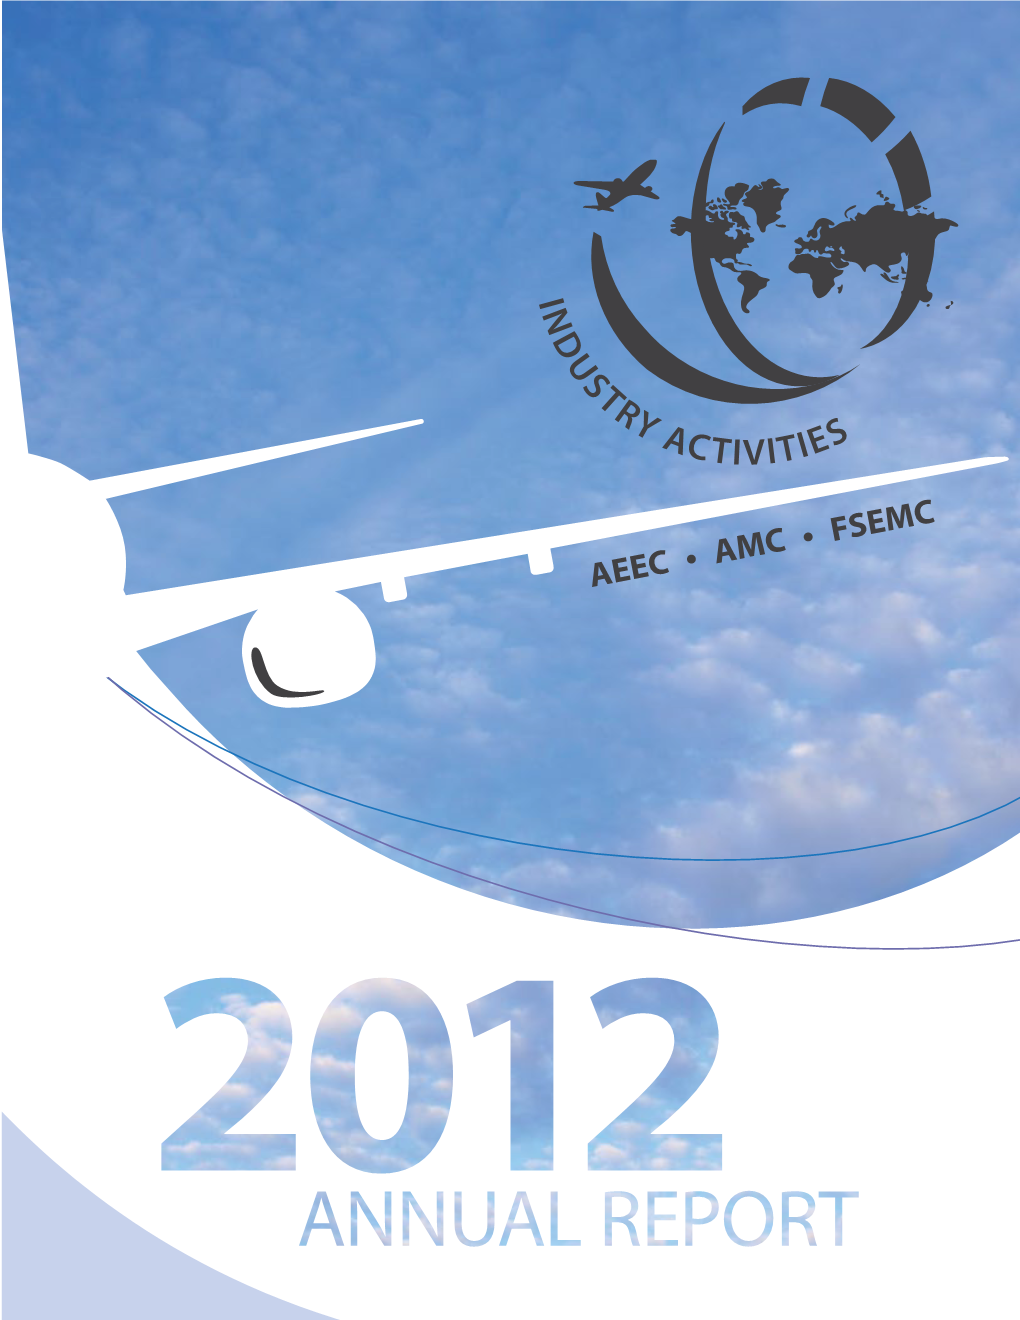 2012 Annual Report Valuable, Informative, and Useful As You Navigate the Work That AEEC, AMC, and FSEMC Has Undertaken and Look Forward to Seeing You in the Future!